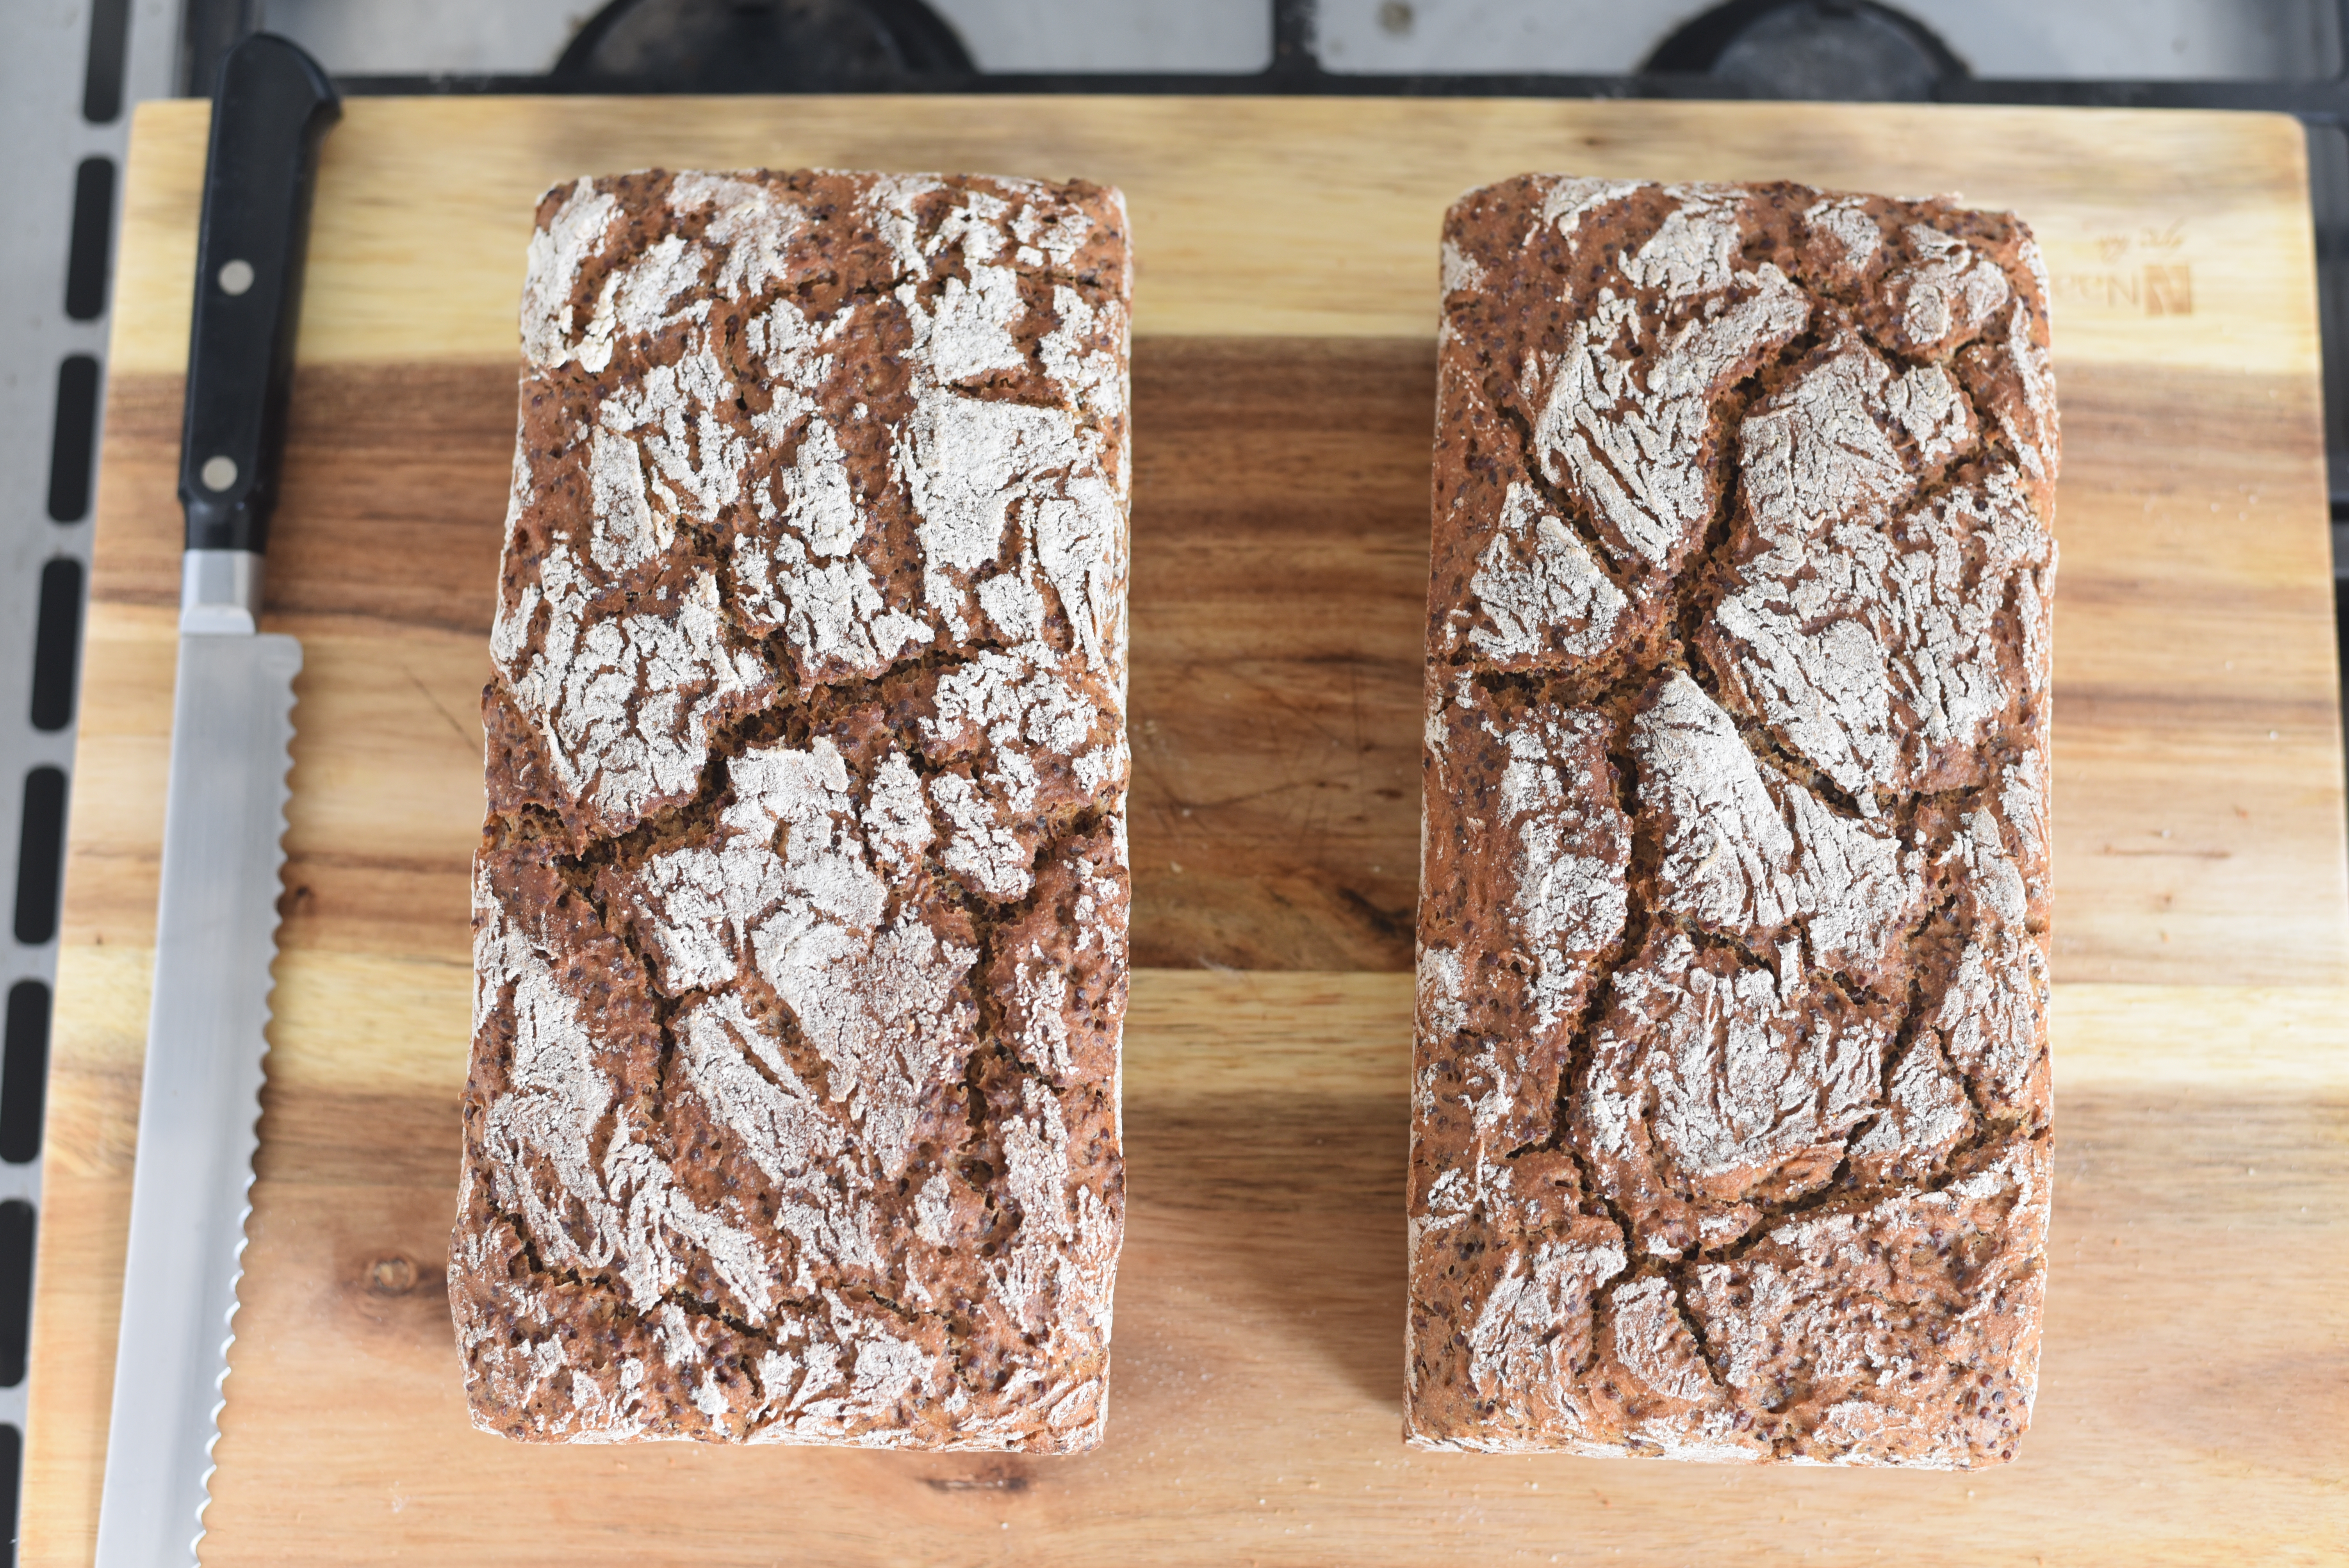 rye red quinoa bread - Cook in city - Enjoy the cooking action!